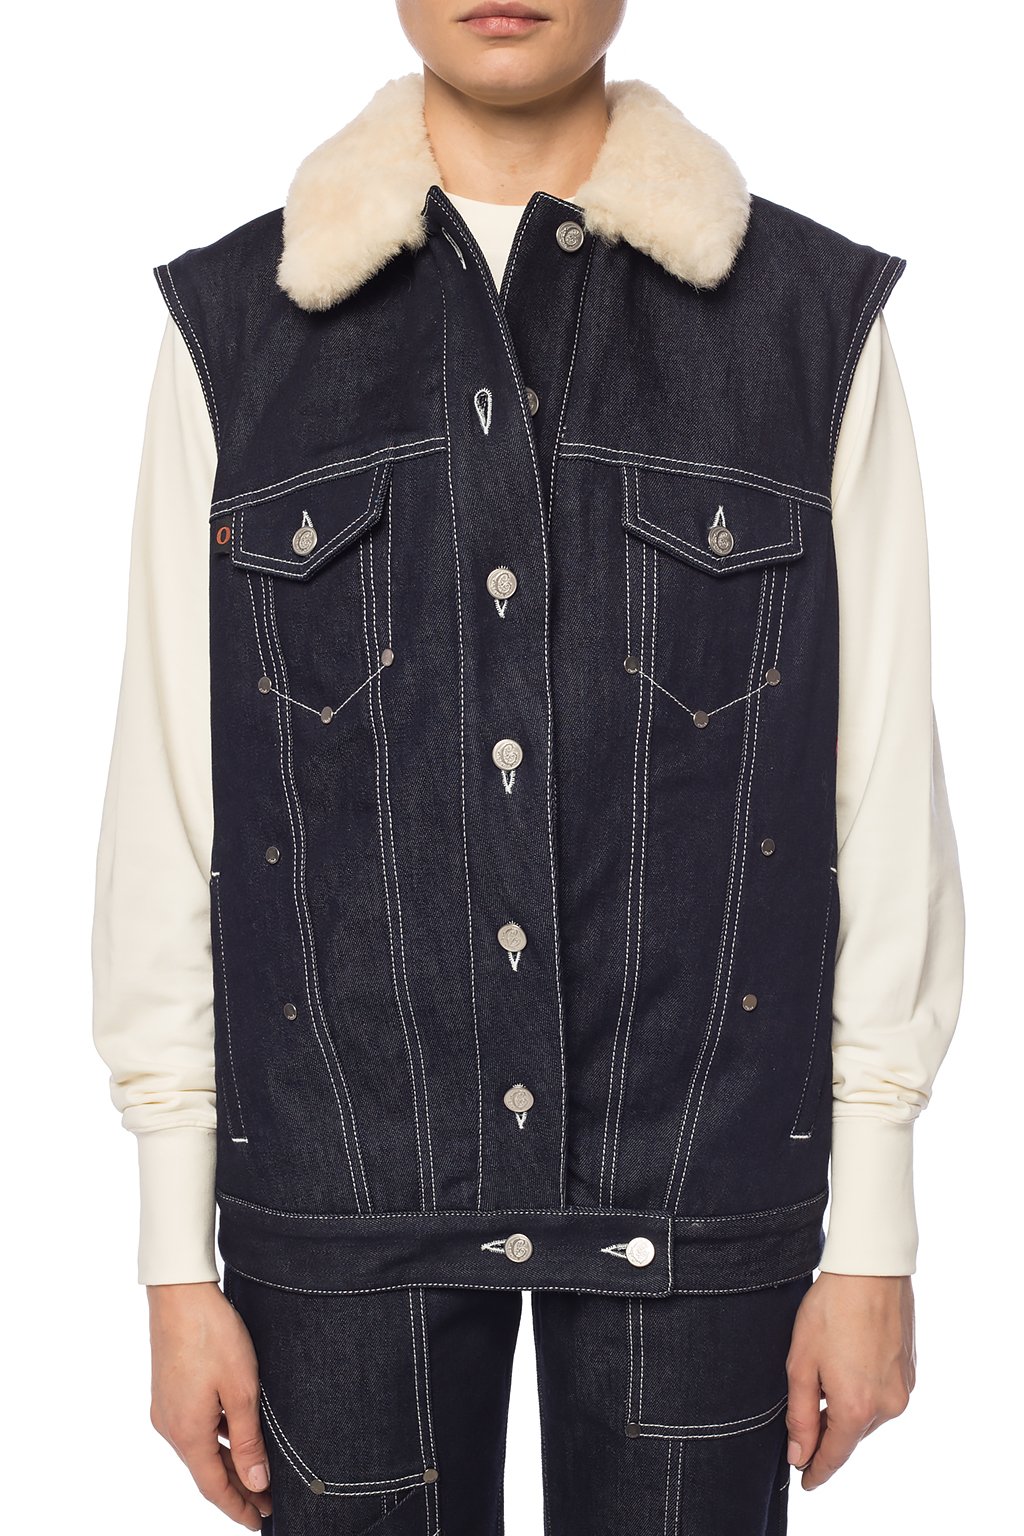 EVEREVE Chloe Cable Vest  EVEREVE